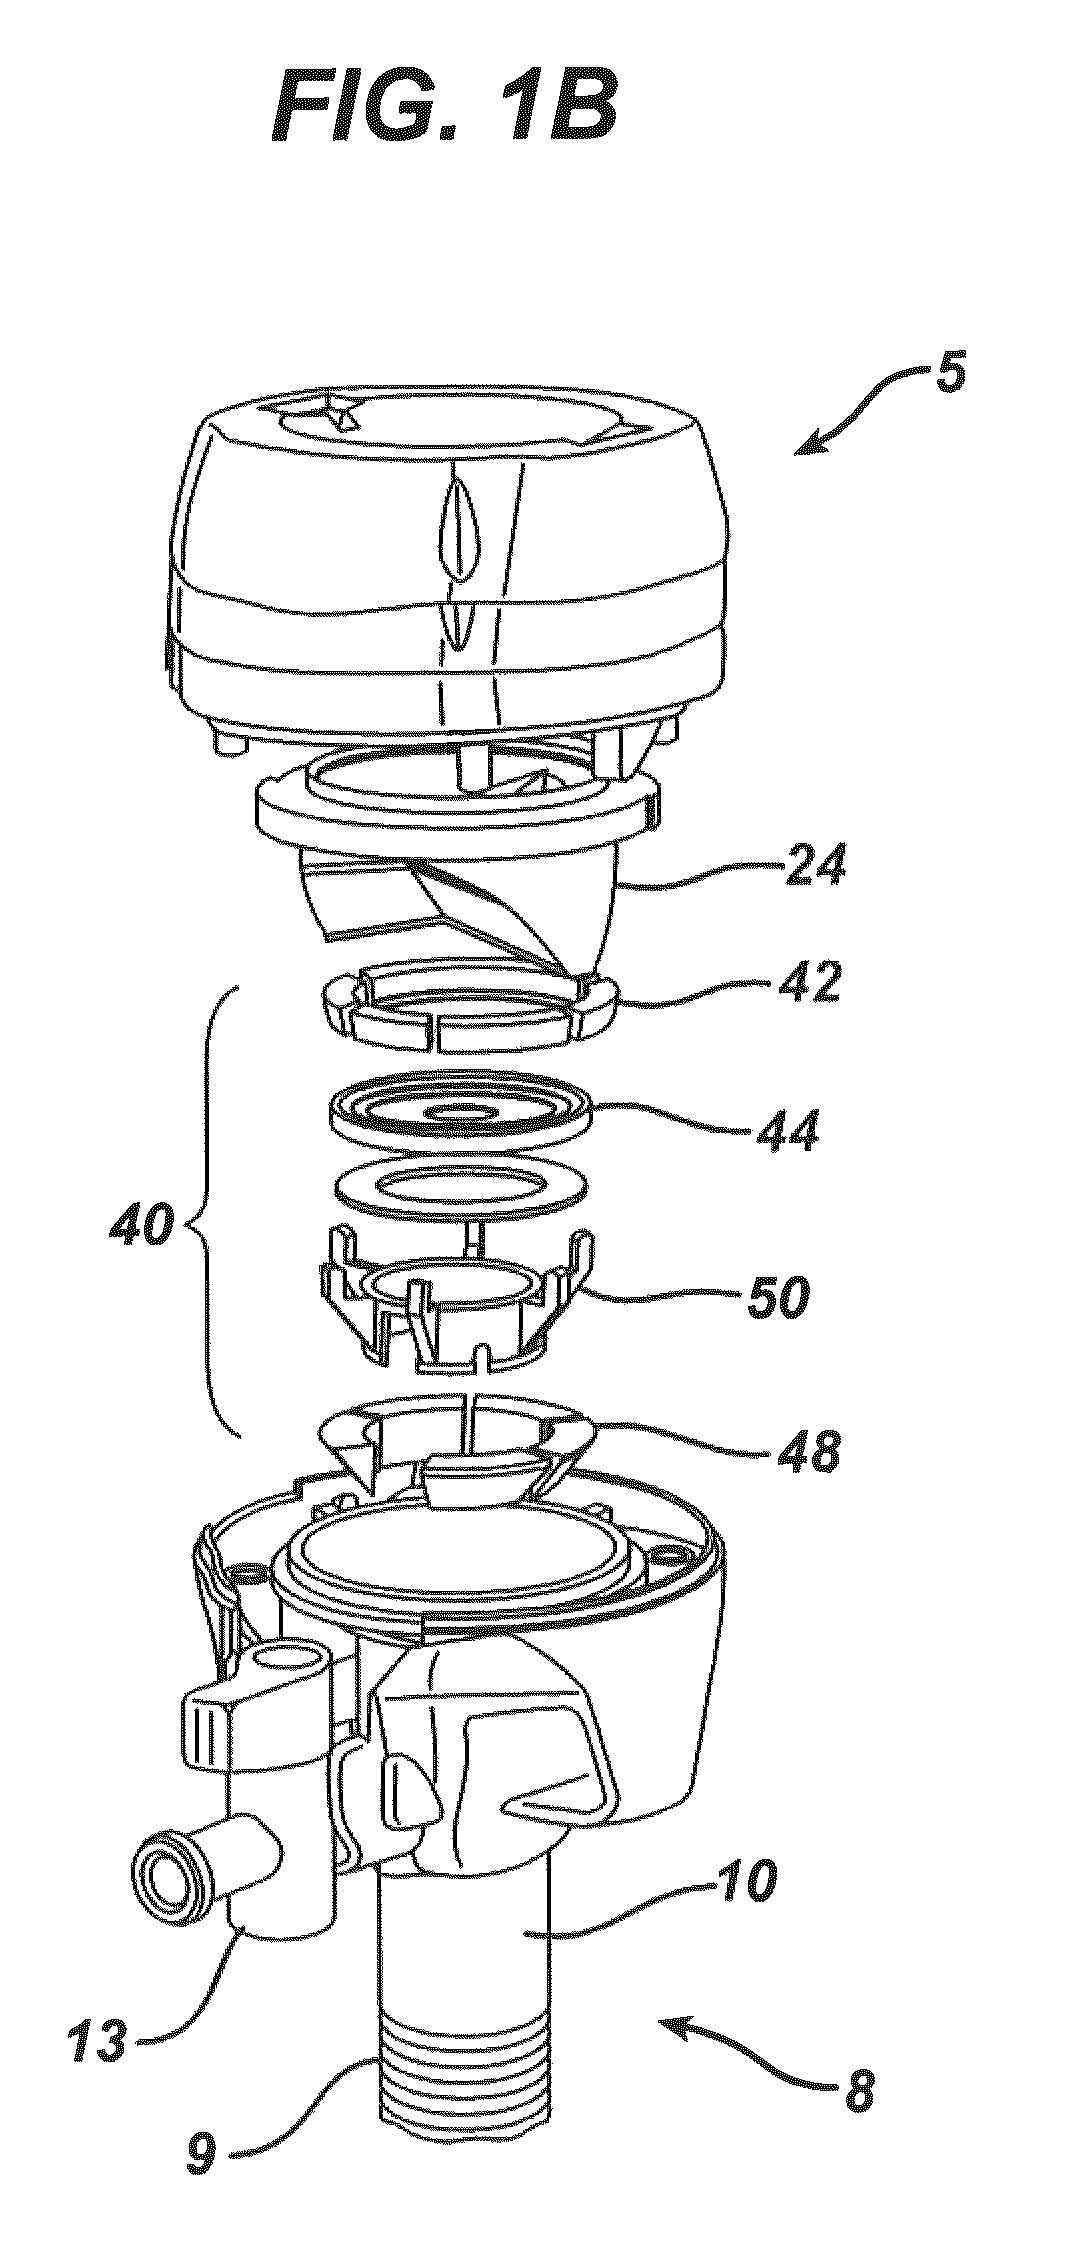 Surgical access device with sorbents